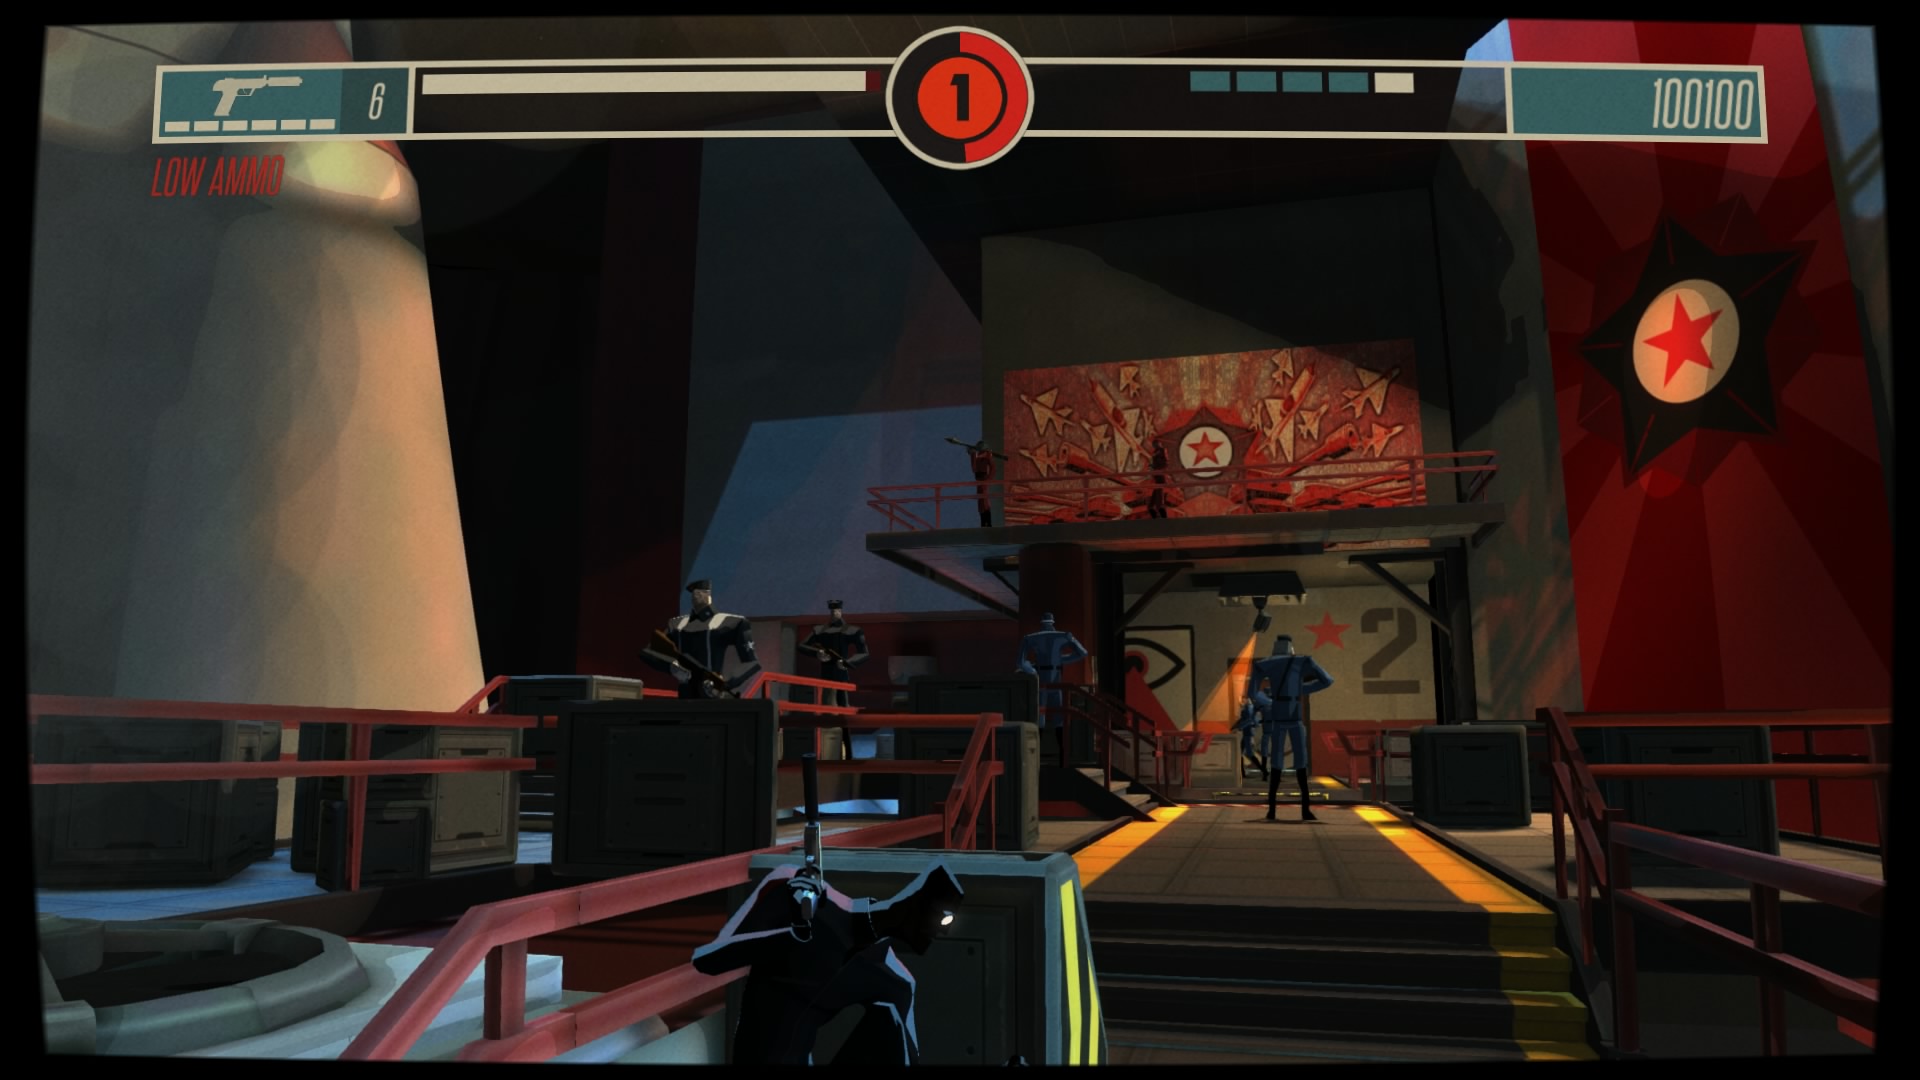 CounterSpy PS4